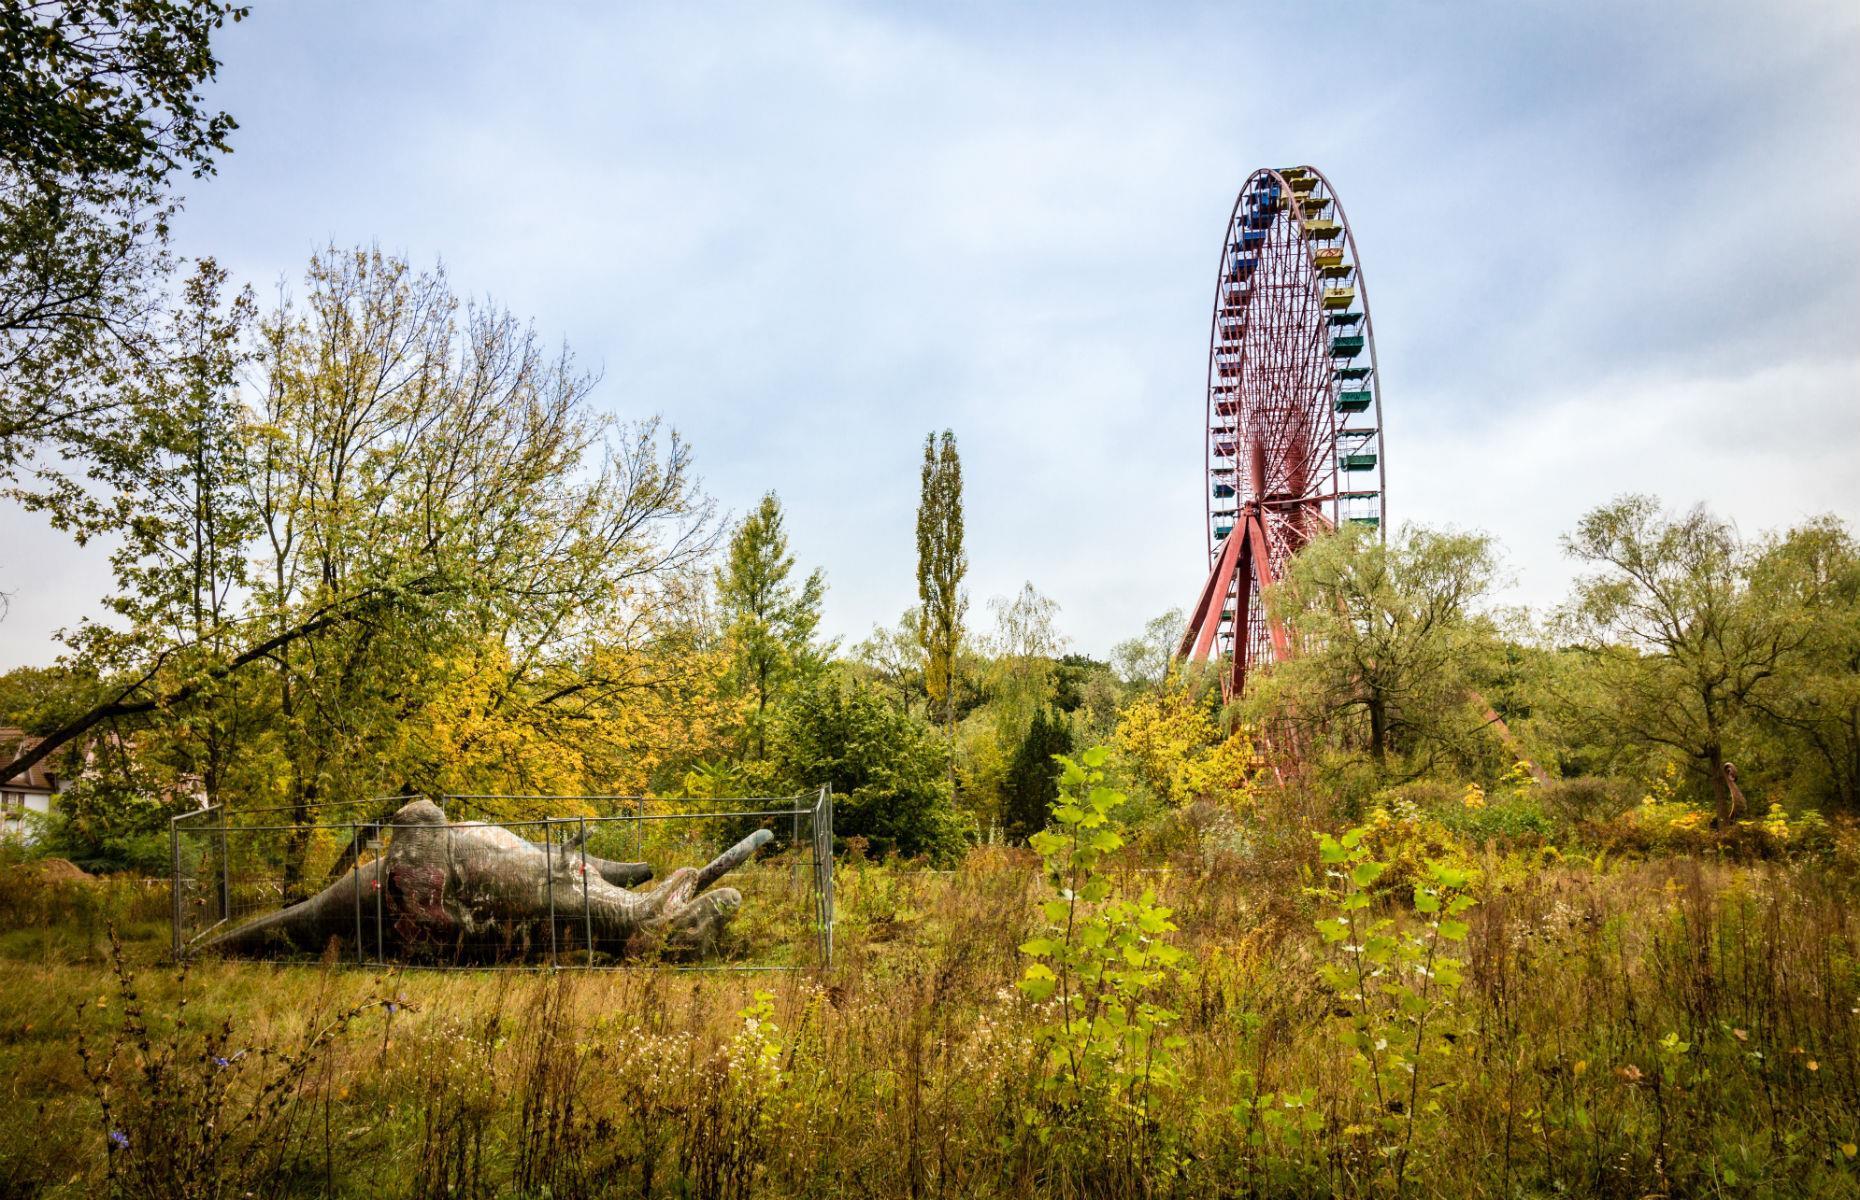 <p>Germany's capital has more than its fair share of abandoned attractions, and Spreepark is one of the most haunting. The theme park began life in the 1960s and had its heyday in the communist era. However, visitor numbers plummeted in the second half of the 20th century. By the early Noughties, the site had shuttered and today all that remains is creaking rides with peeling paint, plus a scattering of creepy animal statues. <a href="https://gruen-berlin.de/en/spreepark/visitor-information-0/visitor-information">Public tours</a> are typically offered, though they're on hold due to COVID-19.</p>